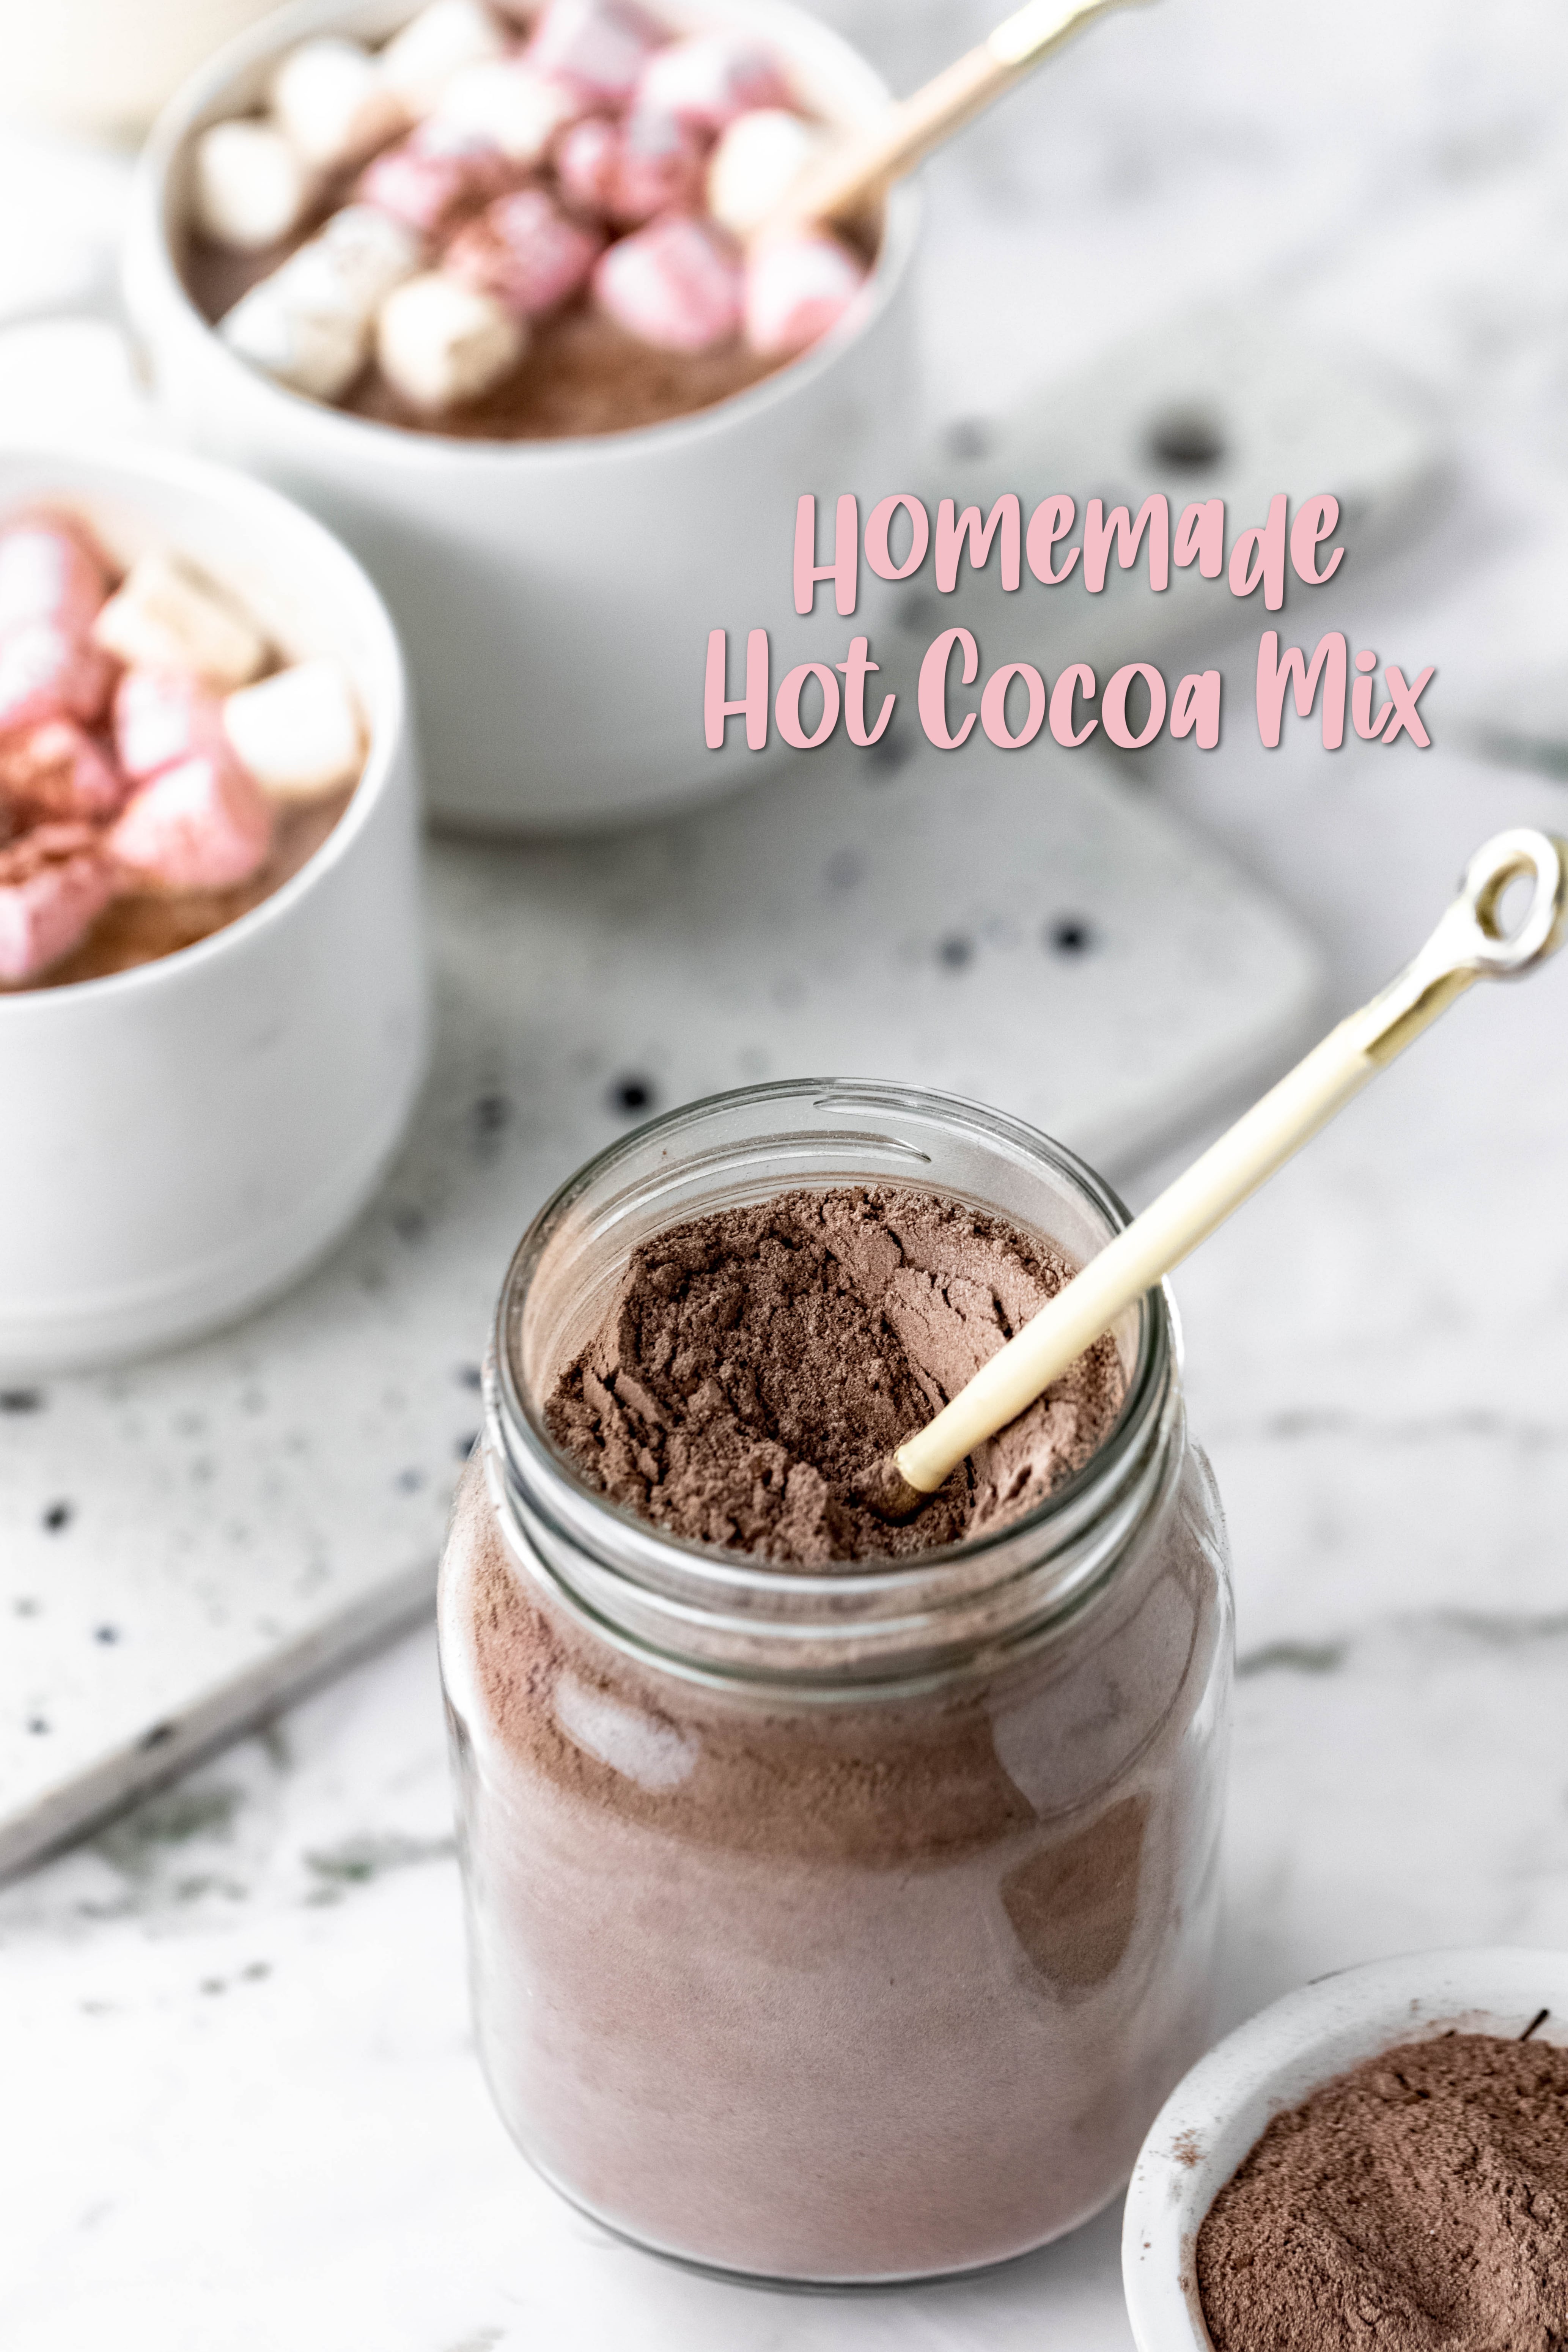 Best Homemade Hot Chocolate Mix Recipe - How to Make Hot Cocoa